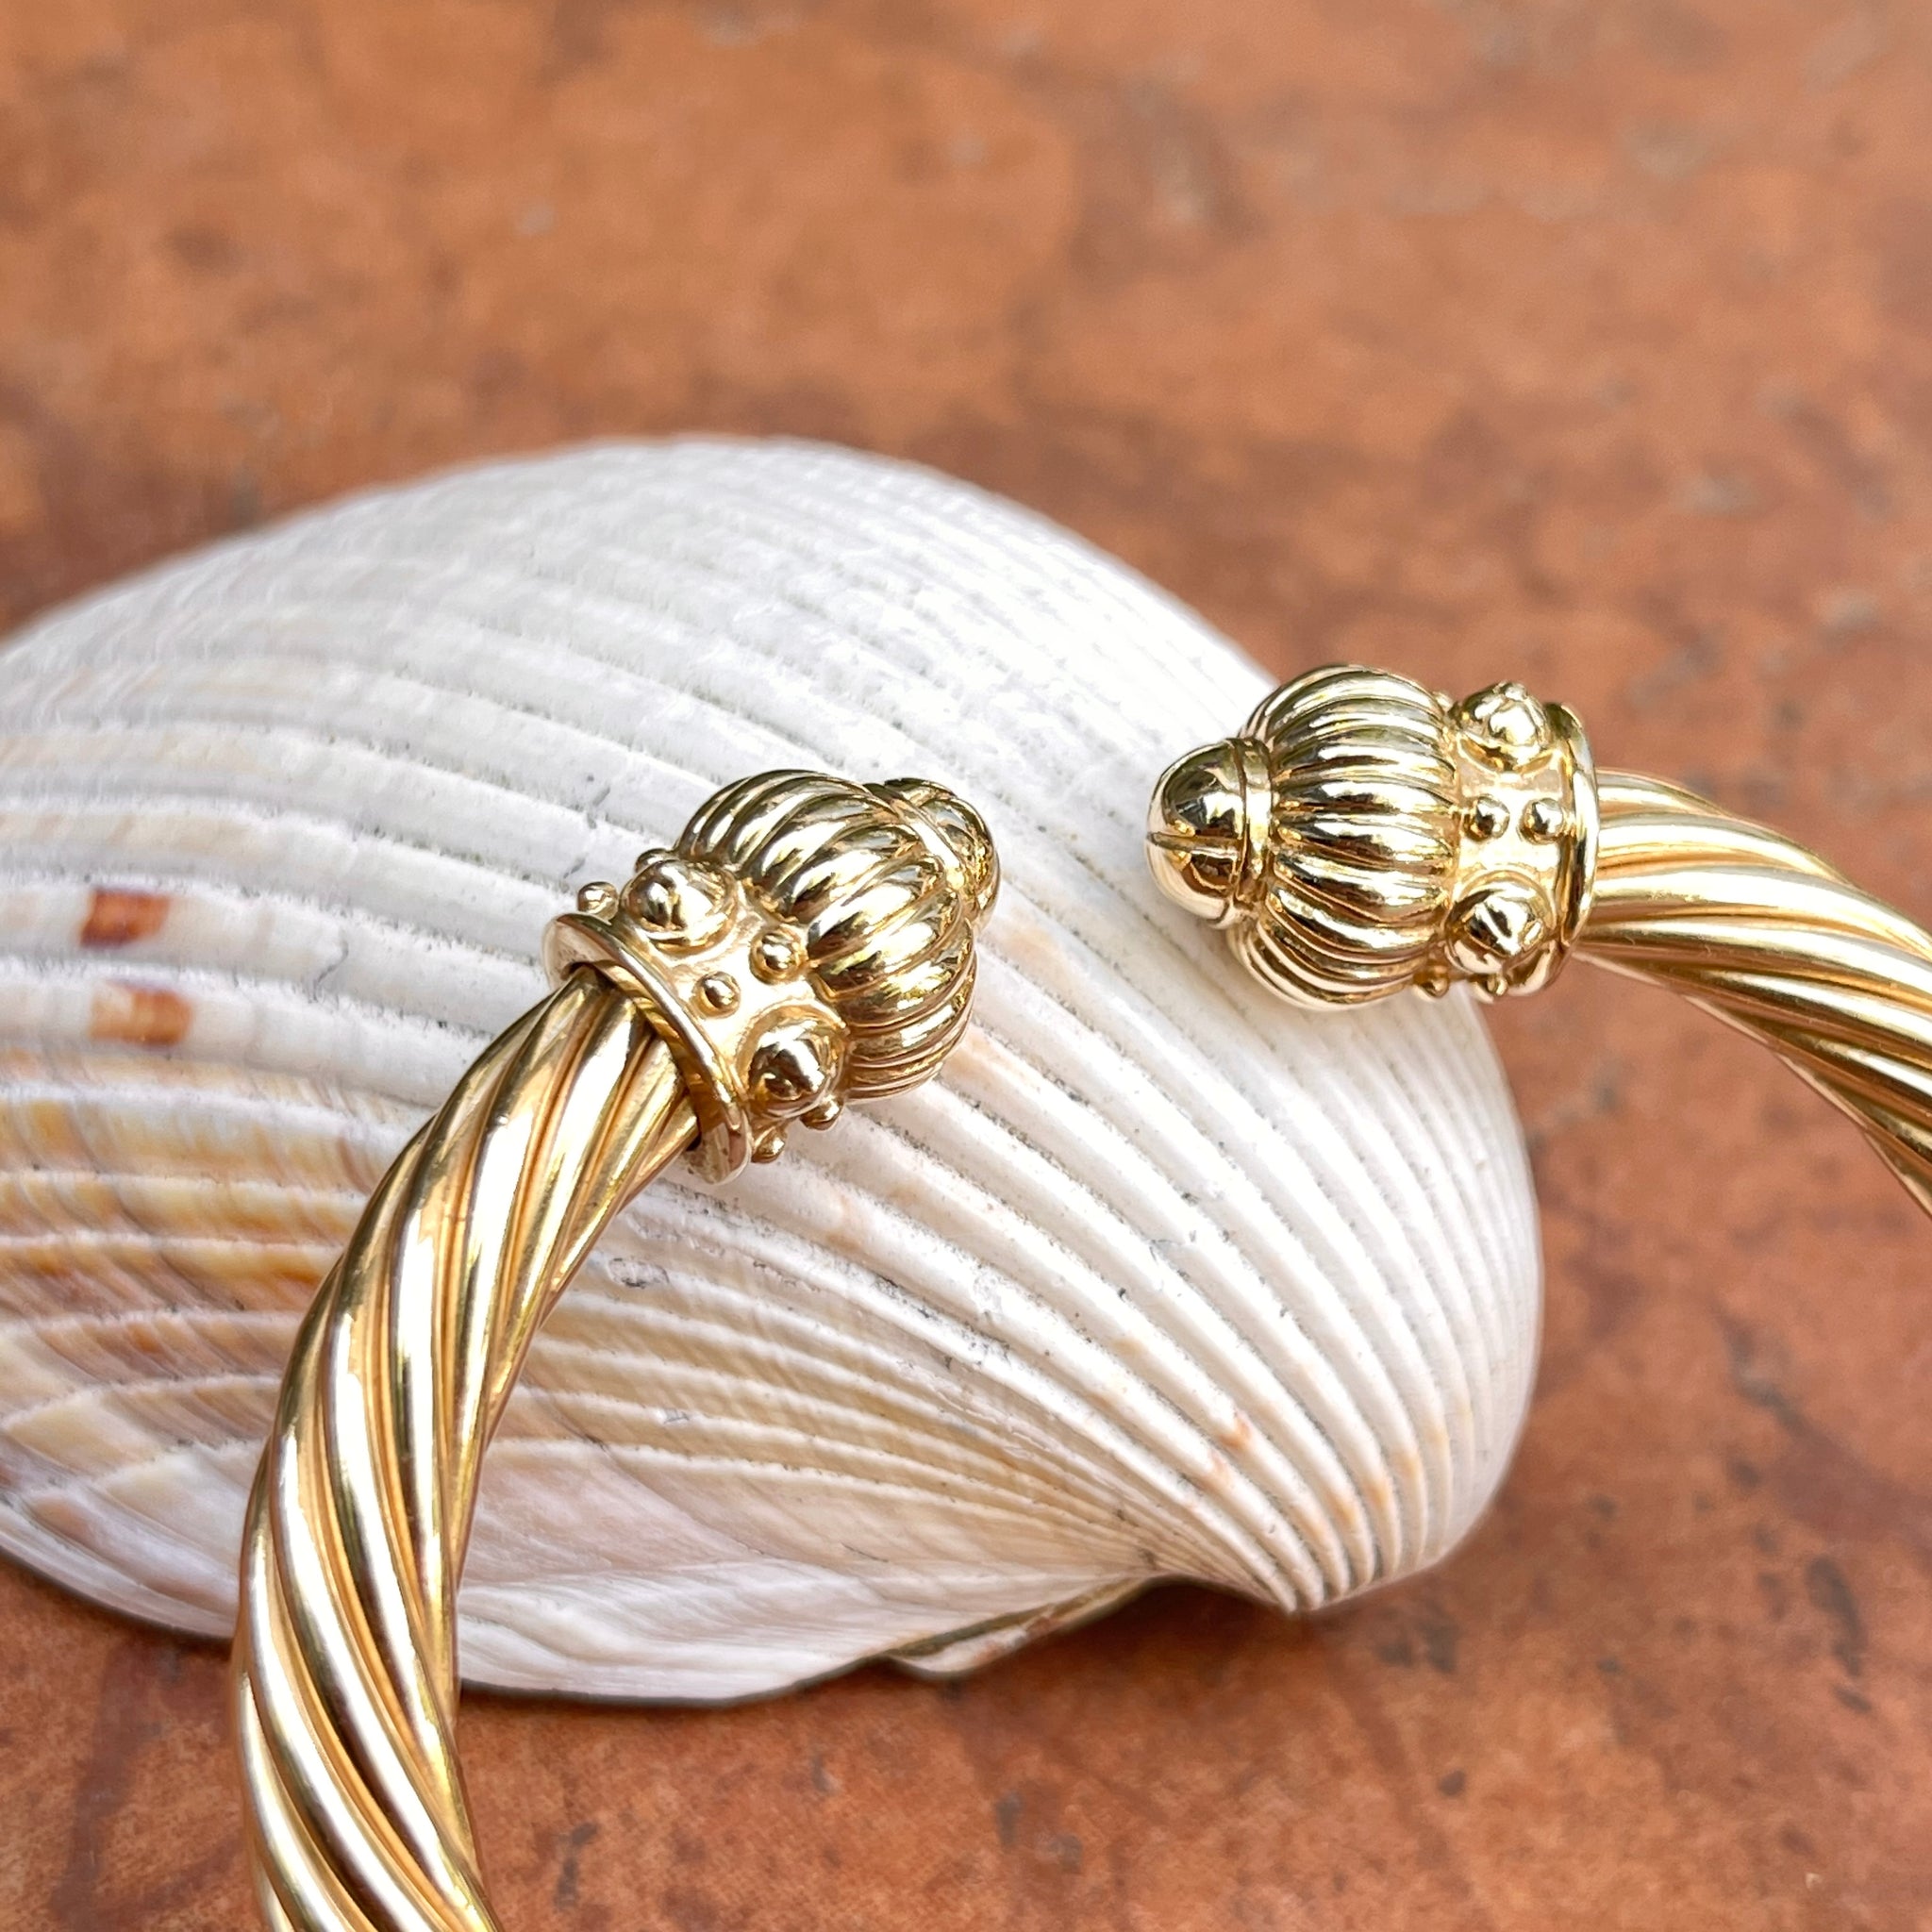 Estate 14KT Yellow Gold Cable Twist Ball End Open Cuff Bangle